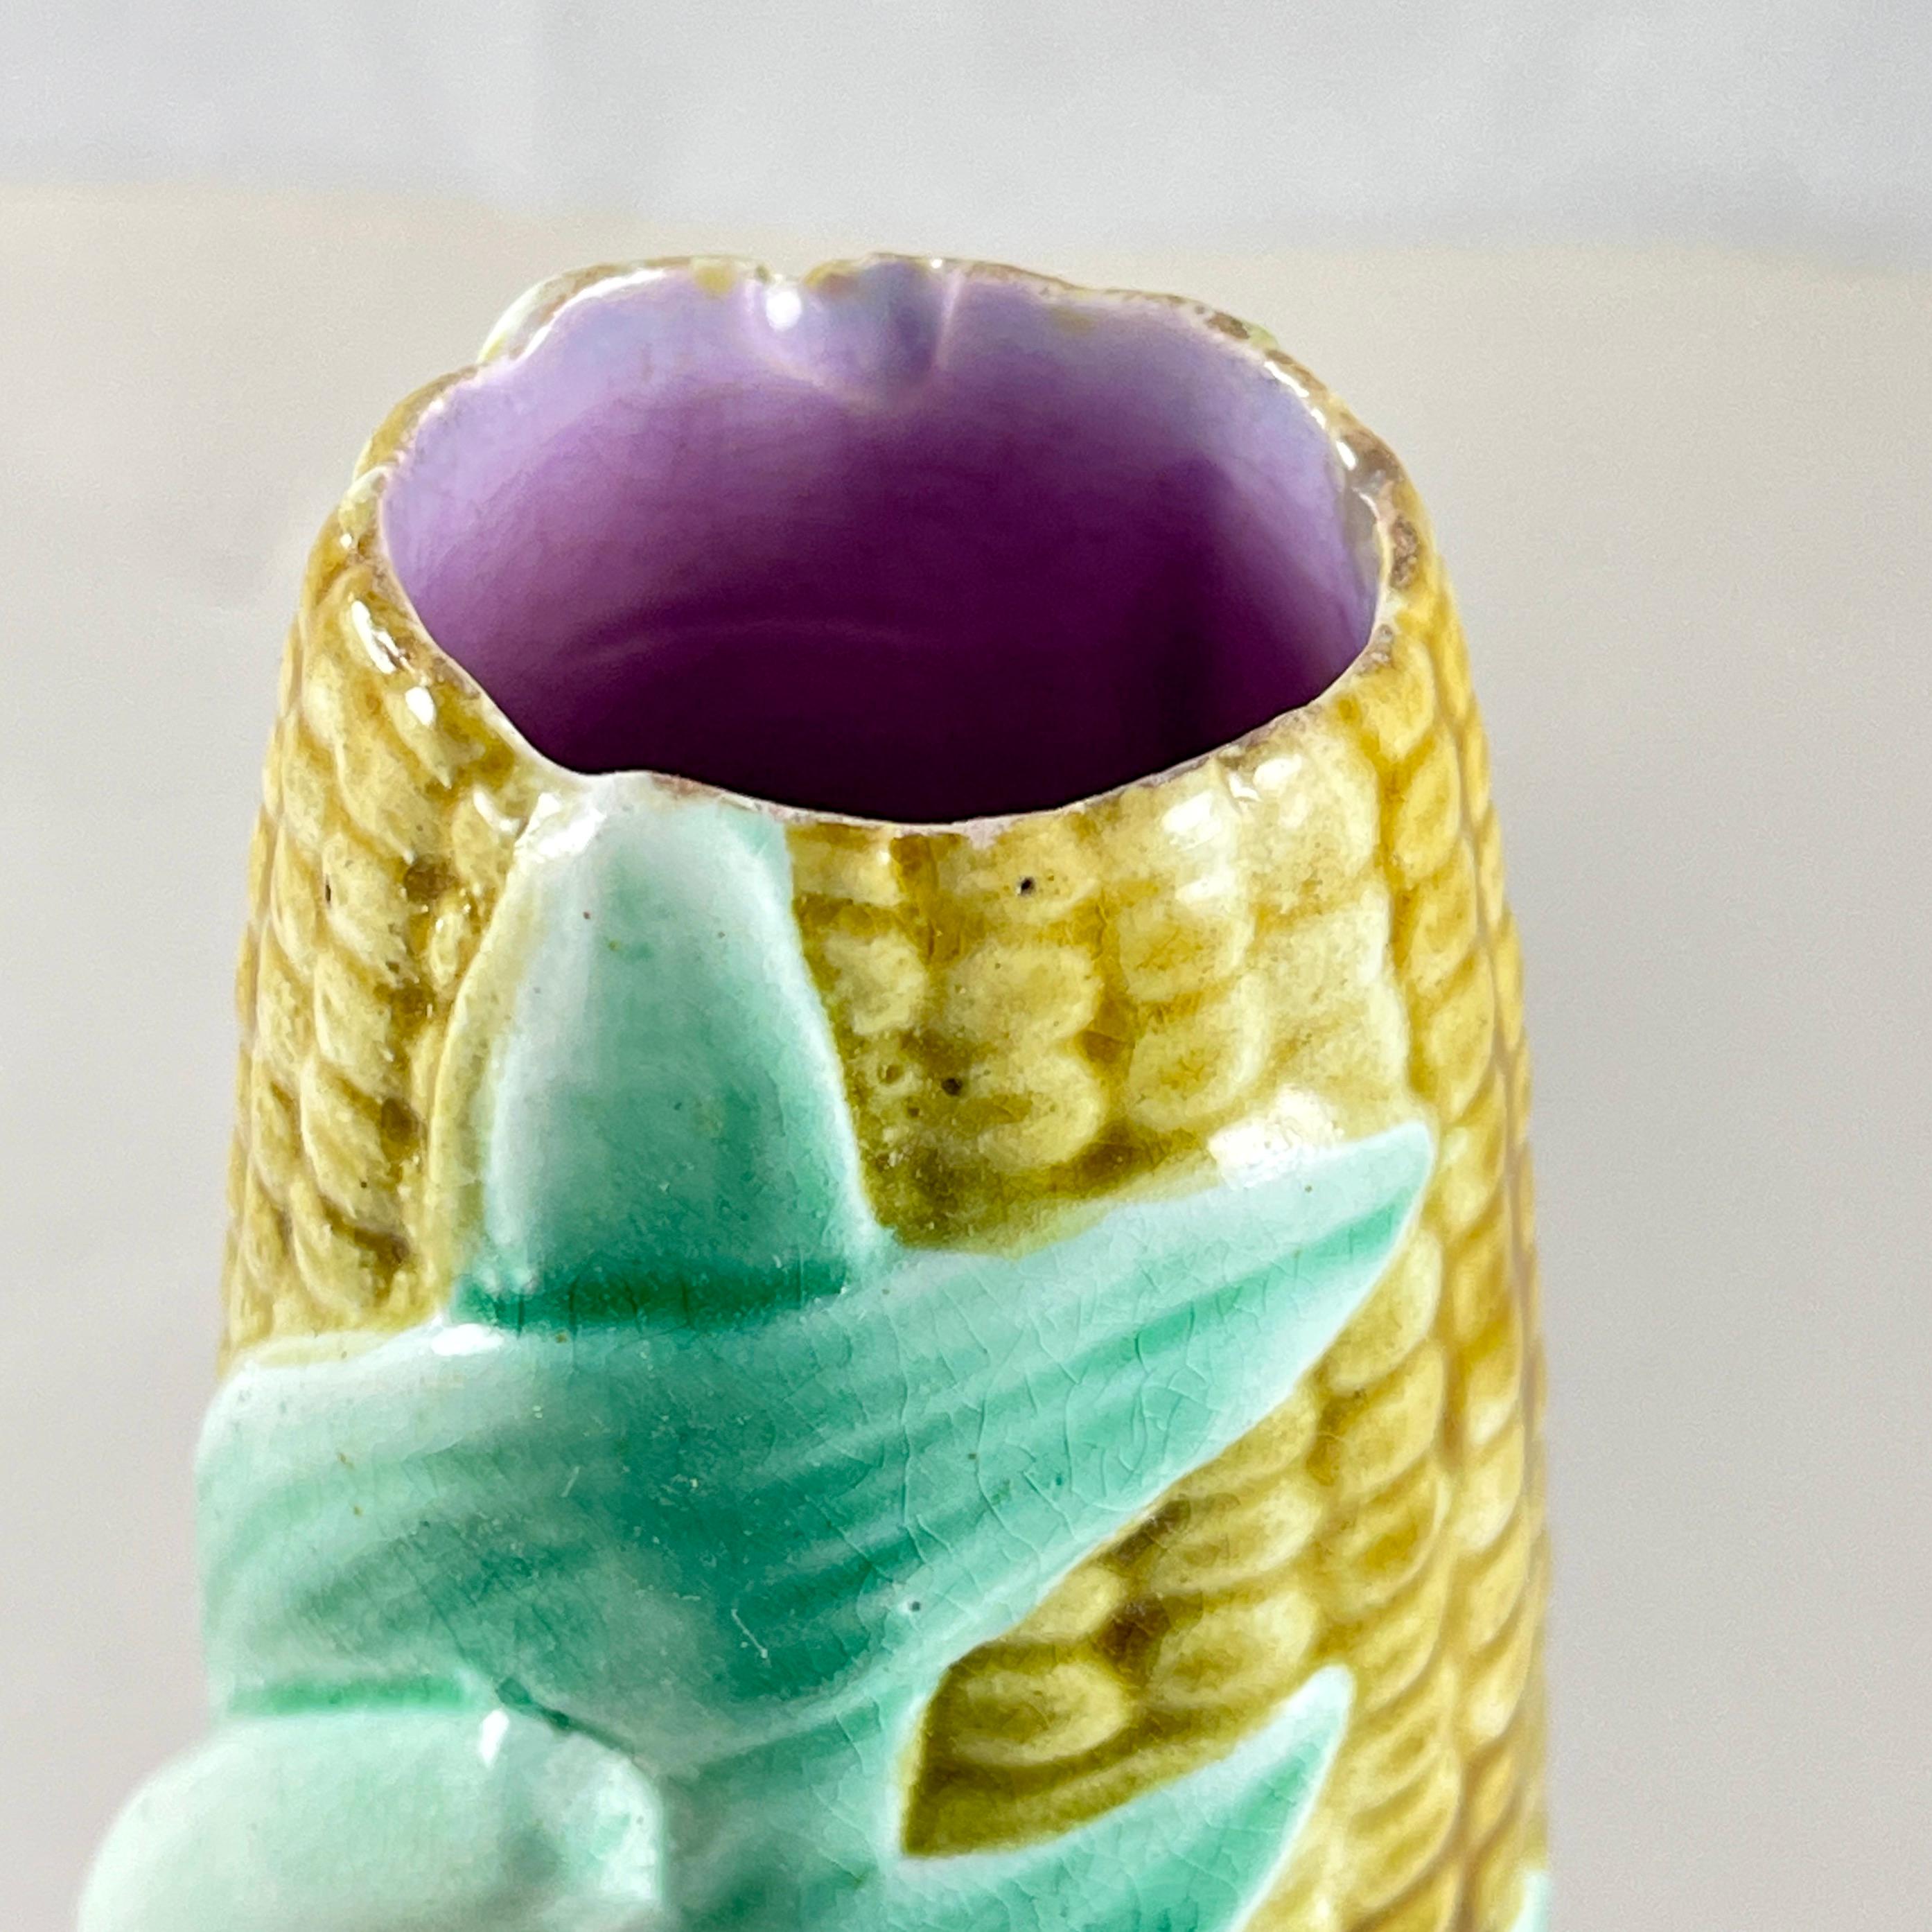 Wardle English Majolica Glazed Hand Holding Corn Spill or Posy Vase In Good Condition For Sale In Philadelphia, PA